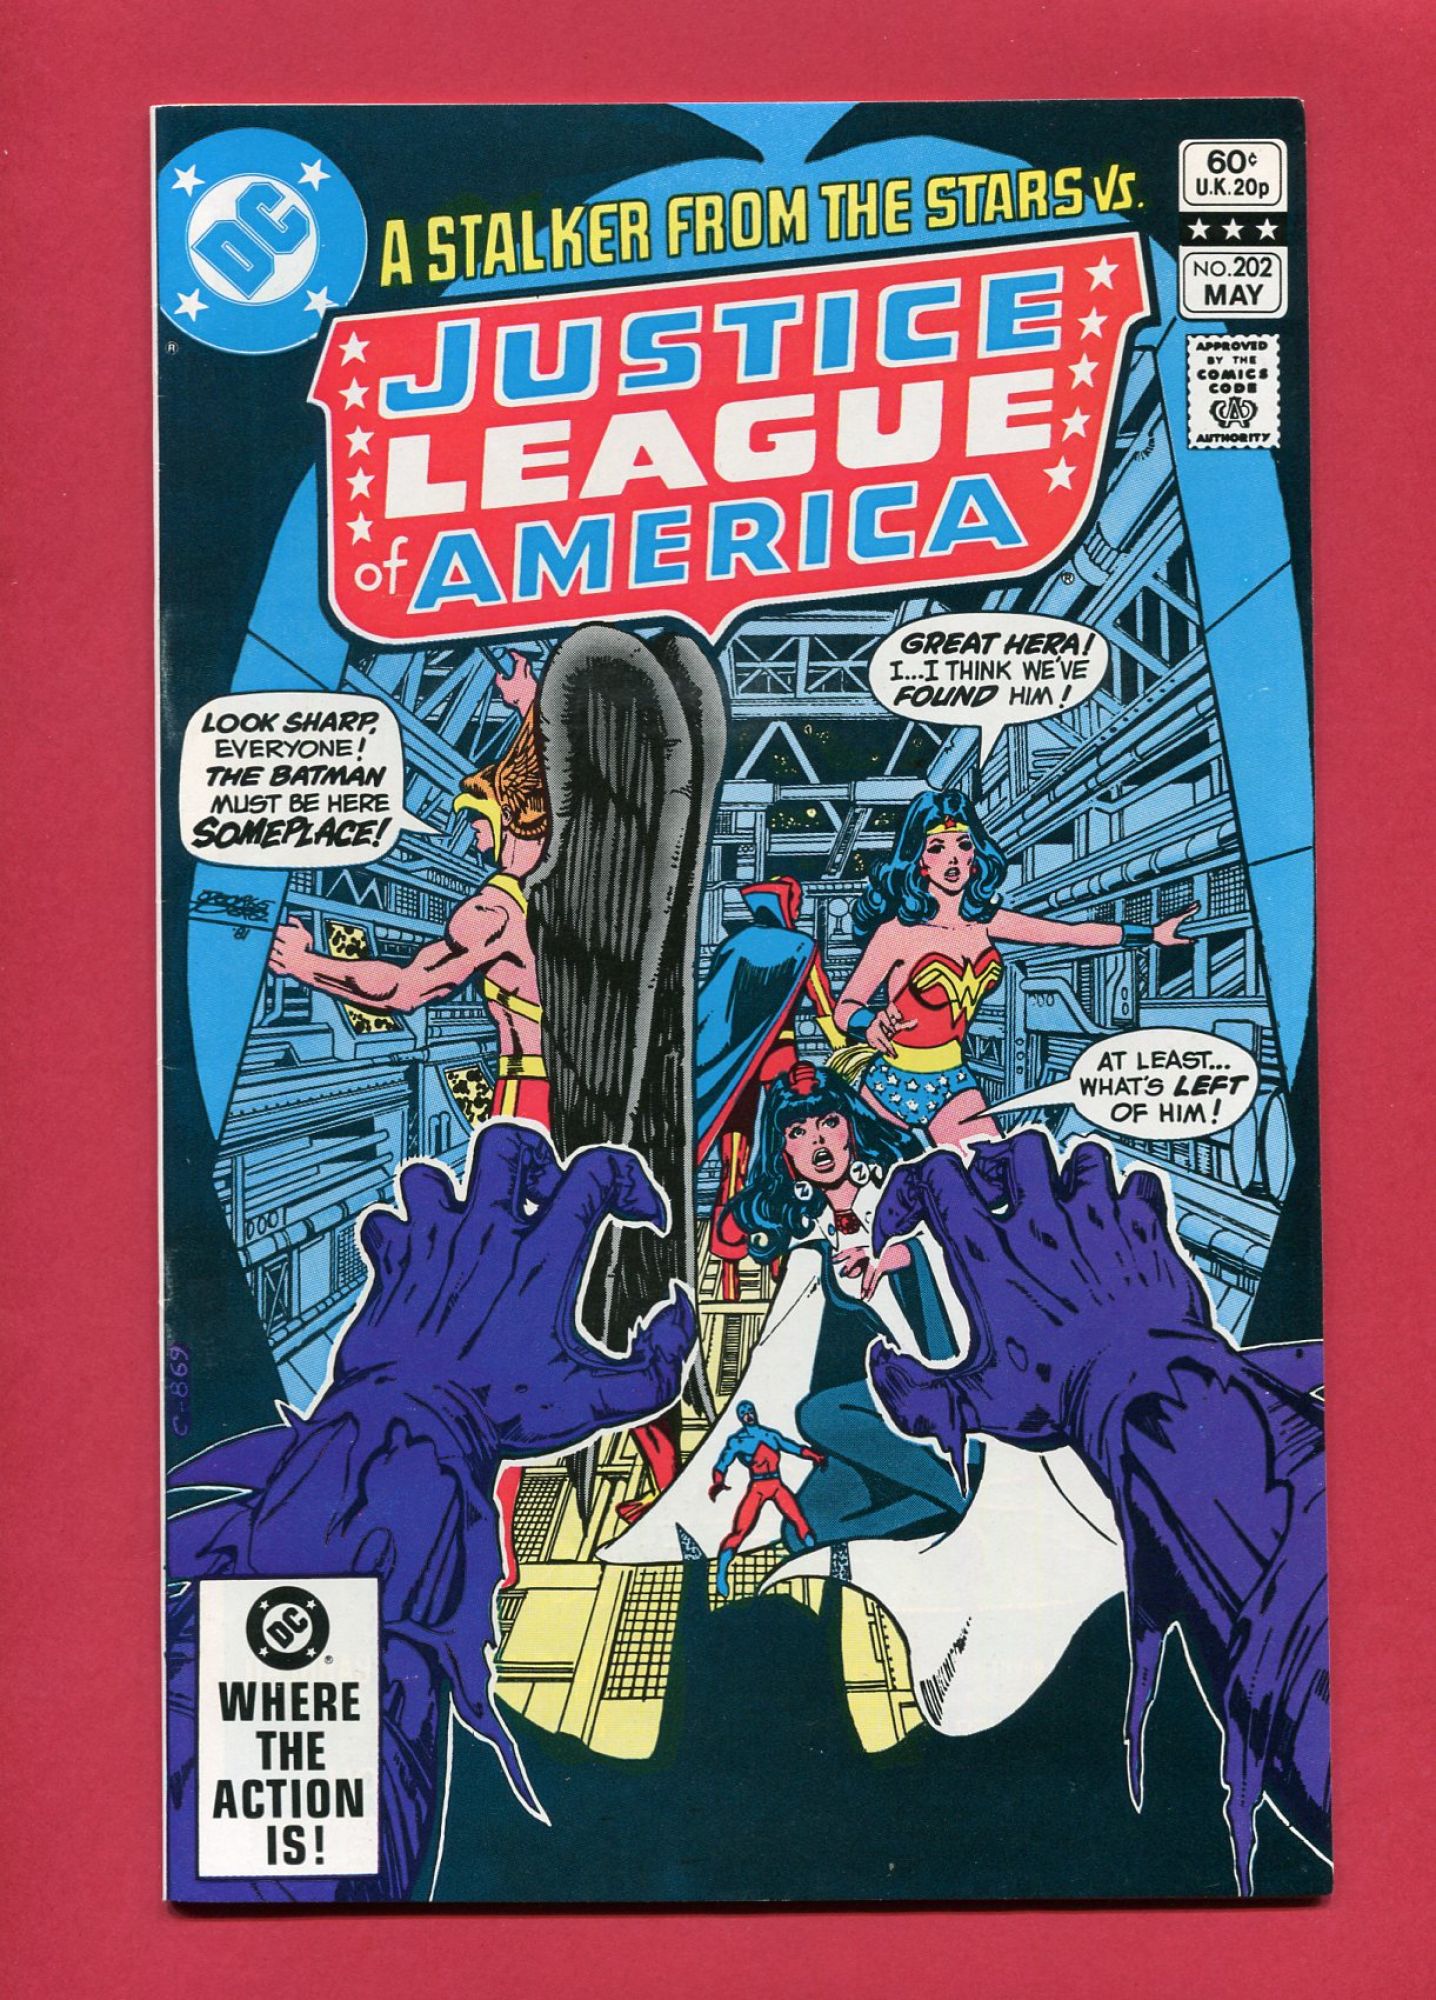 Justice League of America (Volume 1 1960) #202, May 1982, 9.0 VF/NM